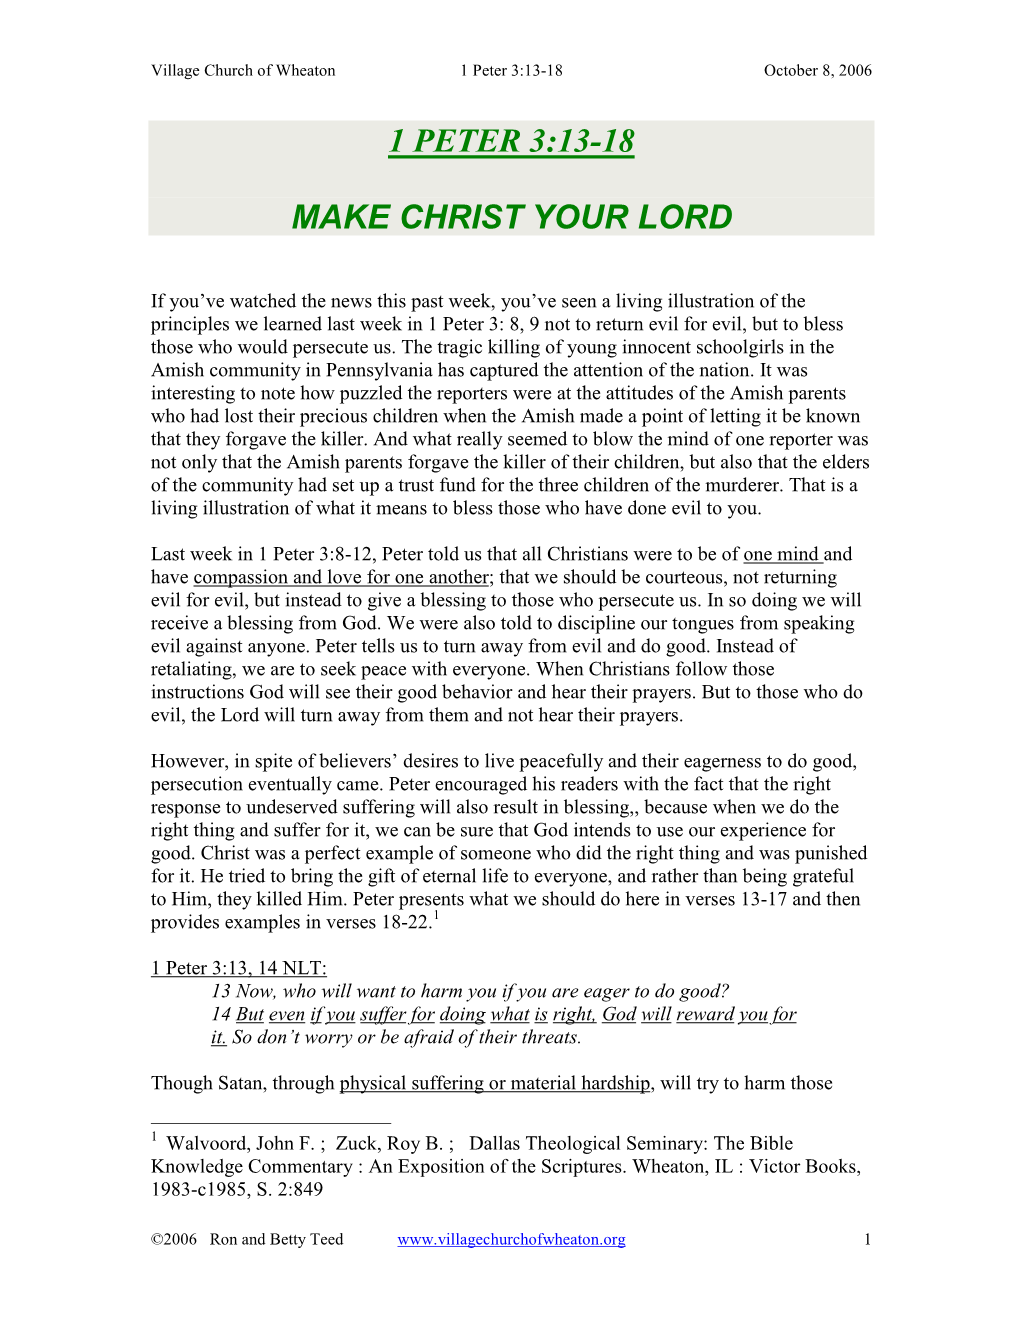 1 Peter 3:13-18 Make Christ Your Lord